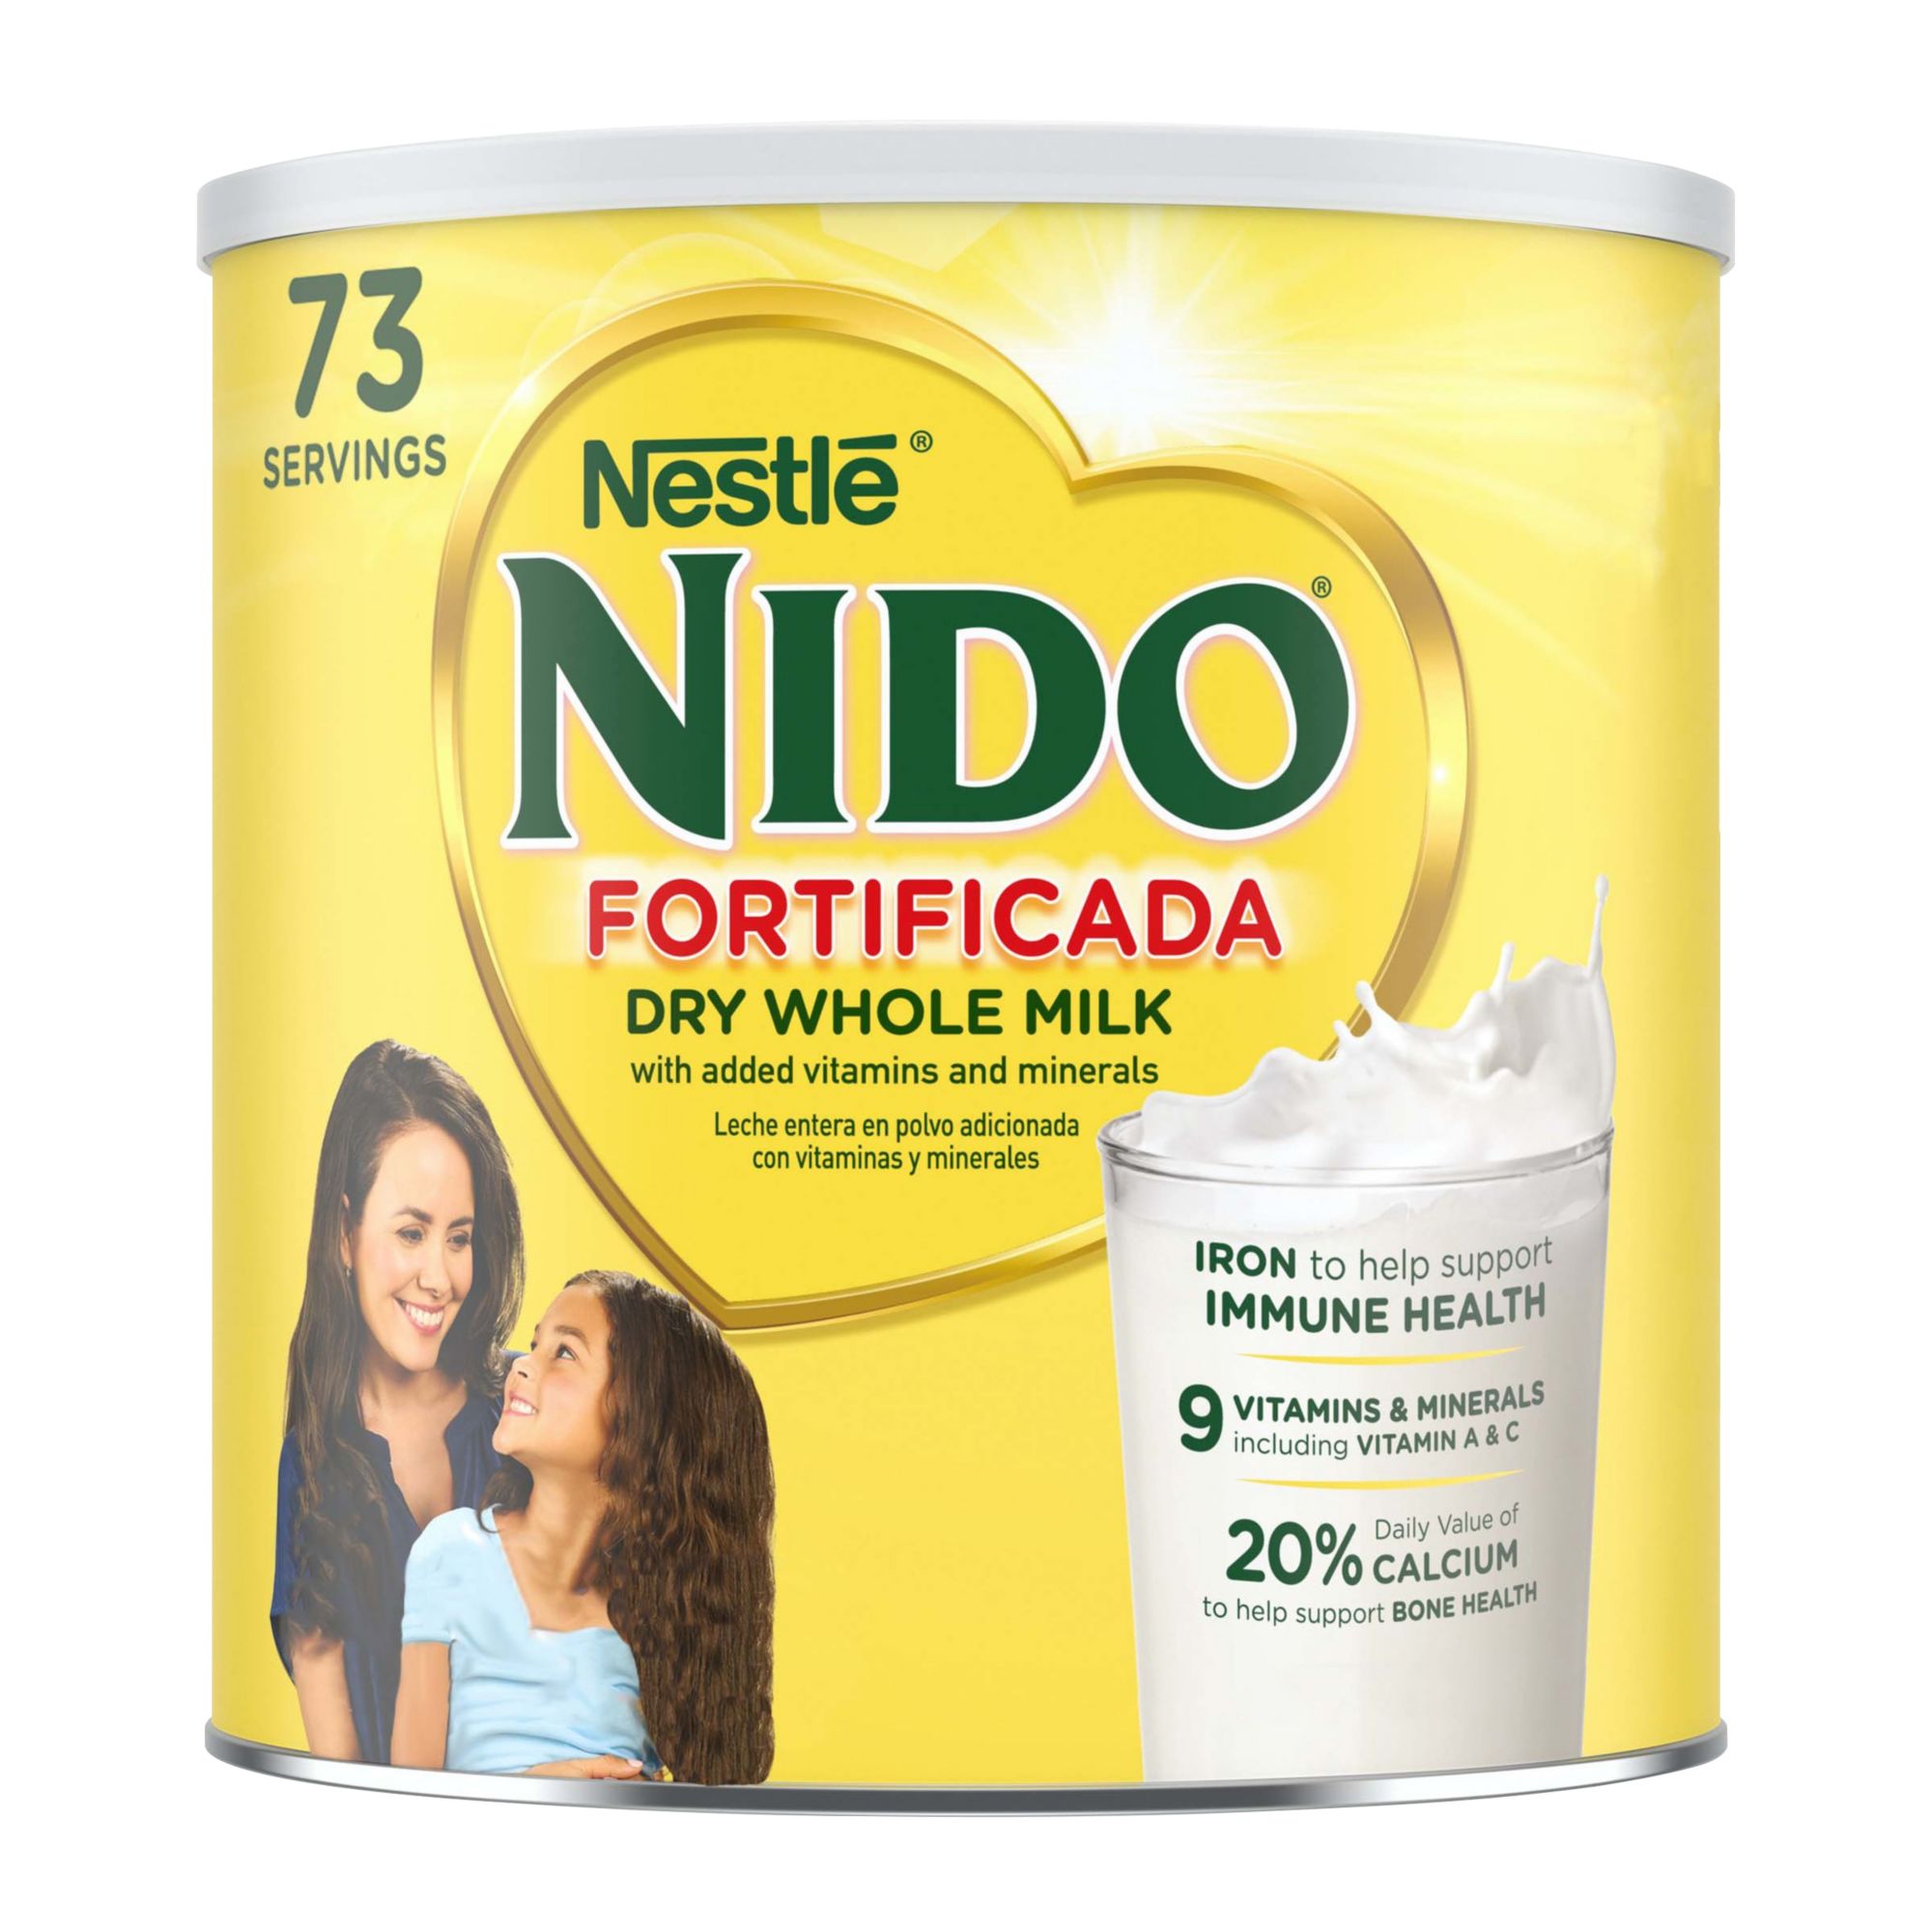 Nido Fortificada Powdered Drink Mix Dry Whole Milk Powder With Vitamins And Minerals Canister, 4.85 lbs.